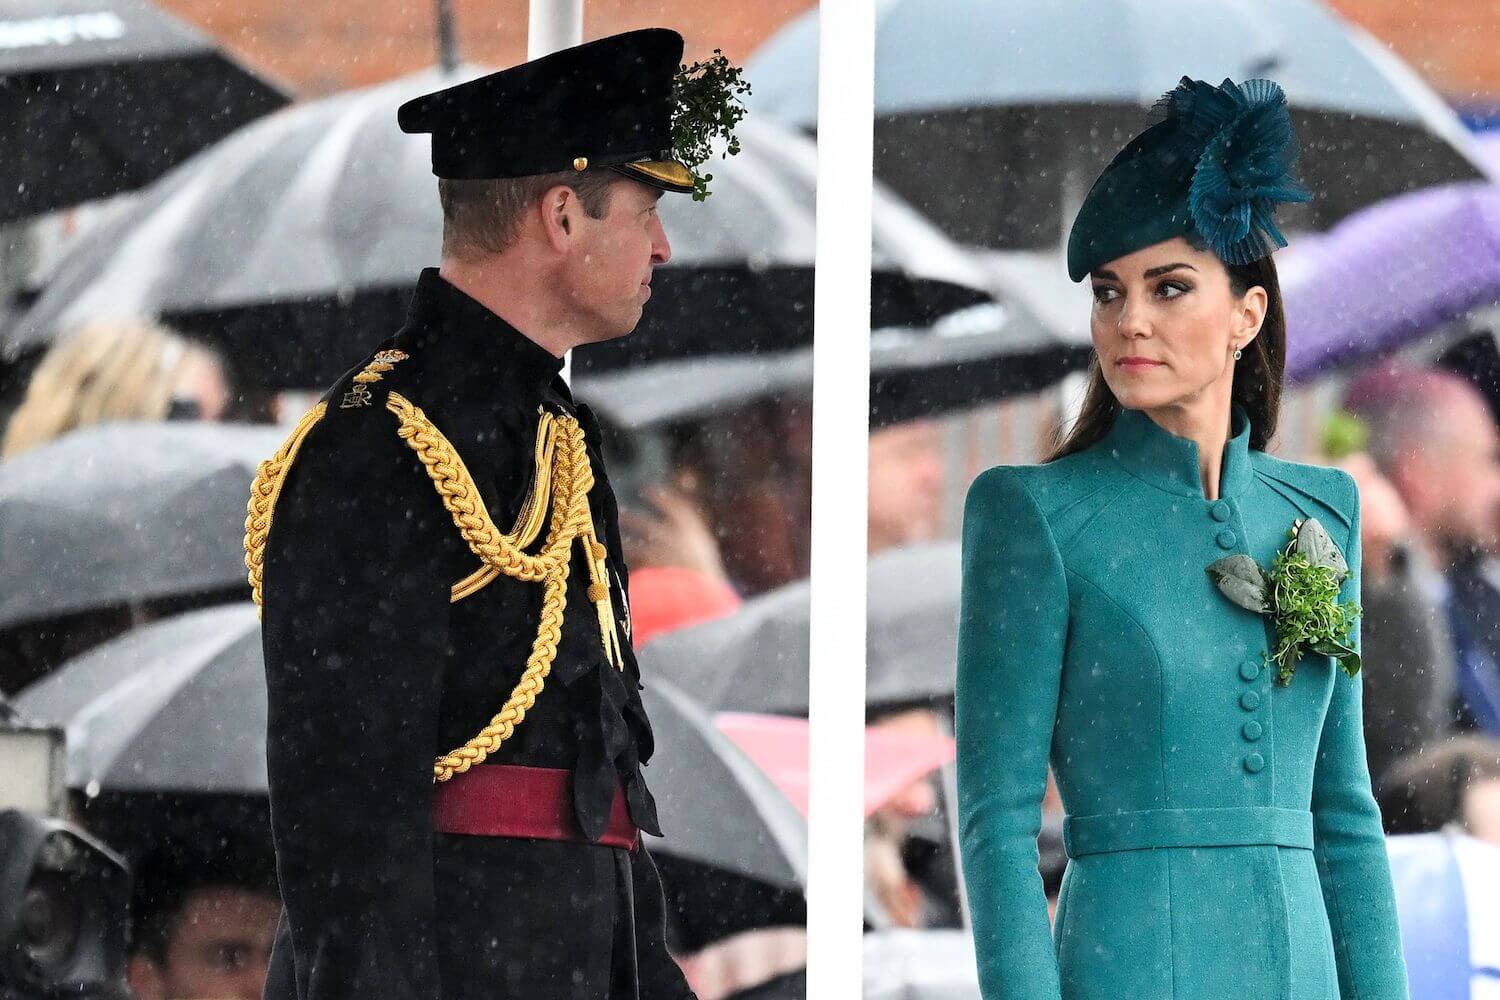 Kate Middleton, dressed in green, gives Prince William a cold stare during the St. Patrick's Day parade